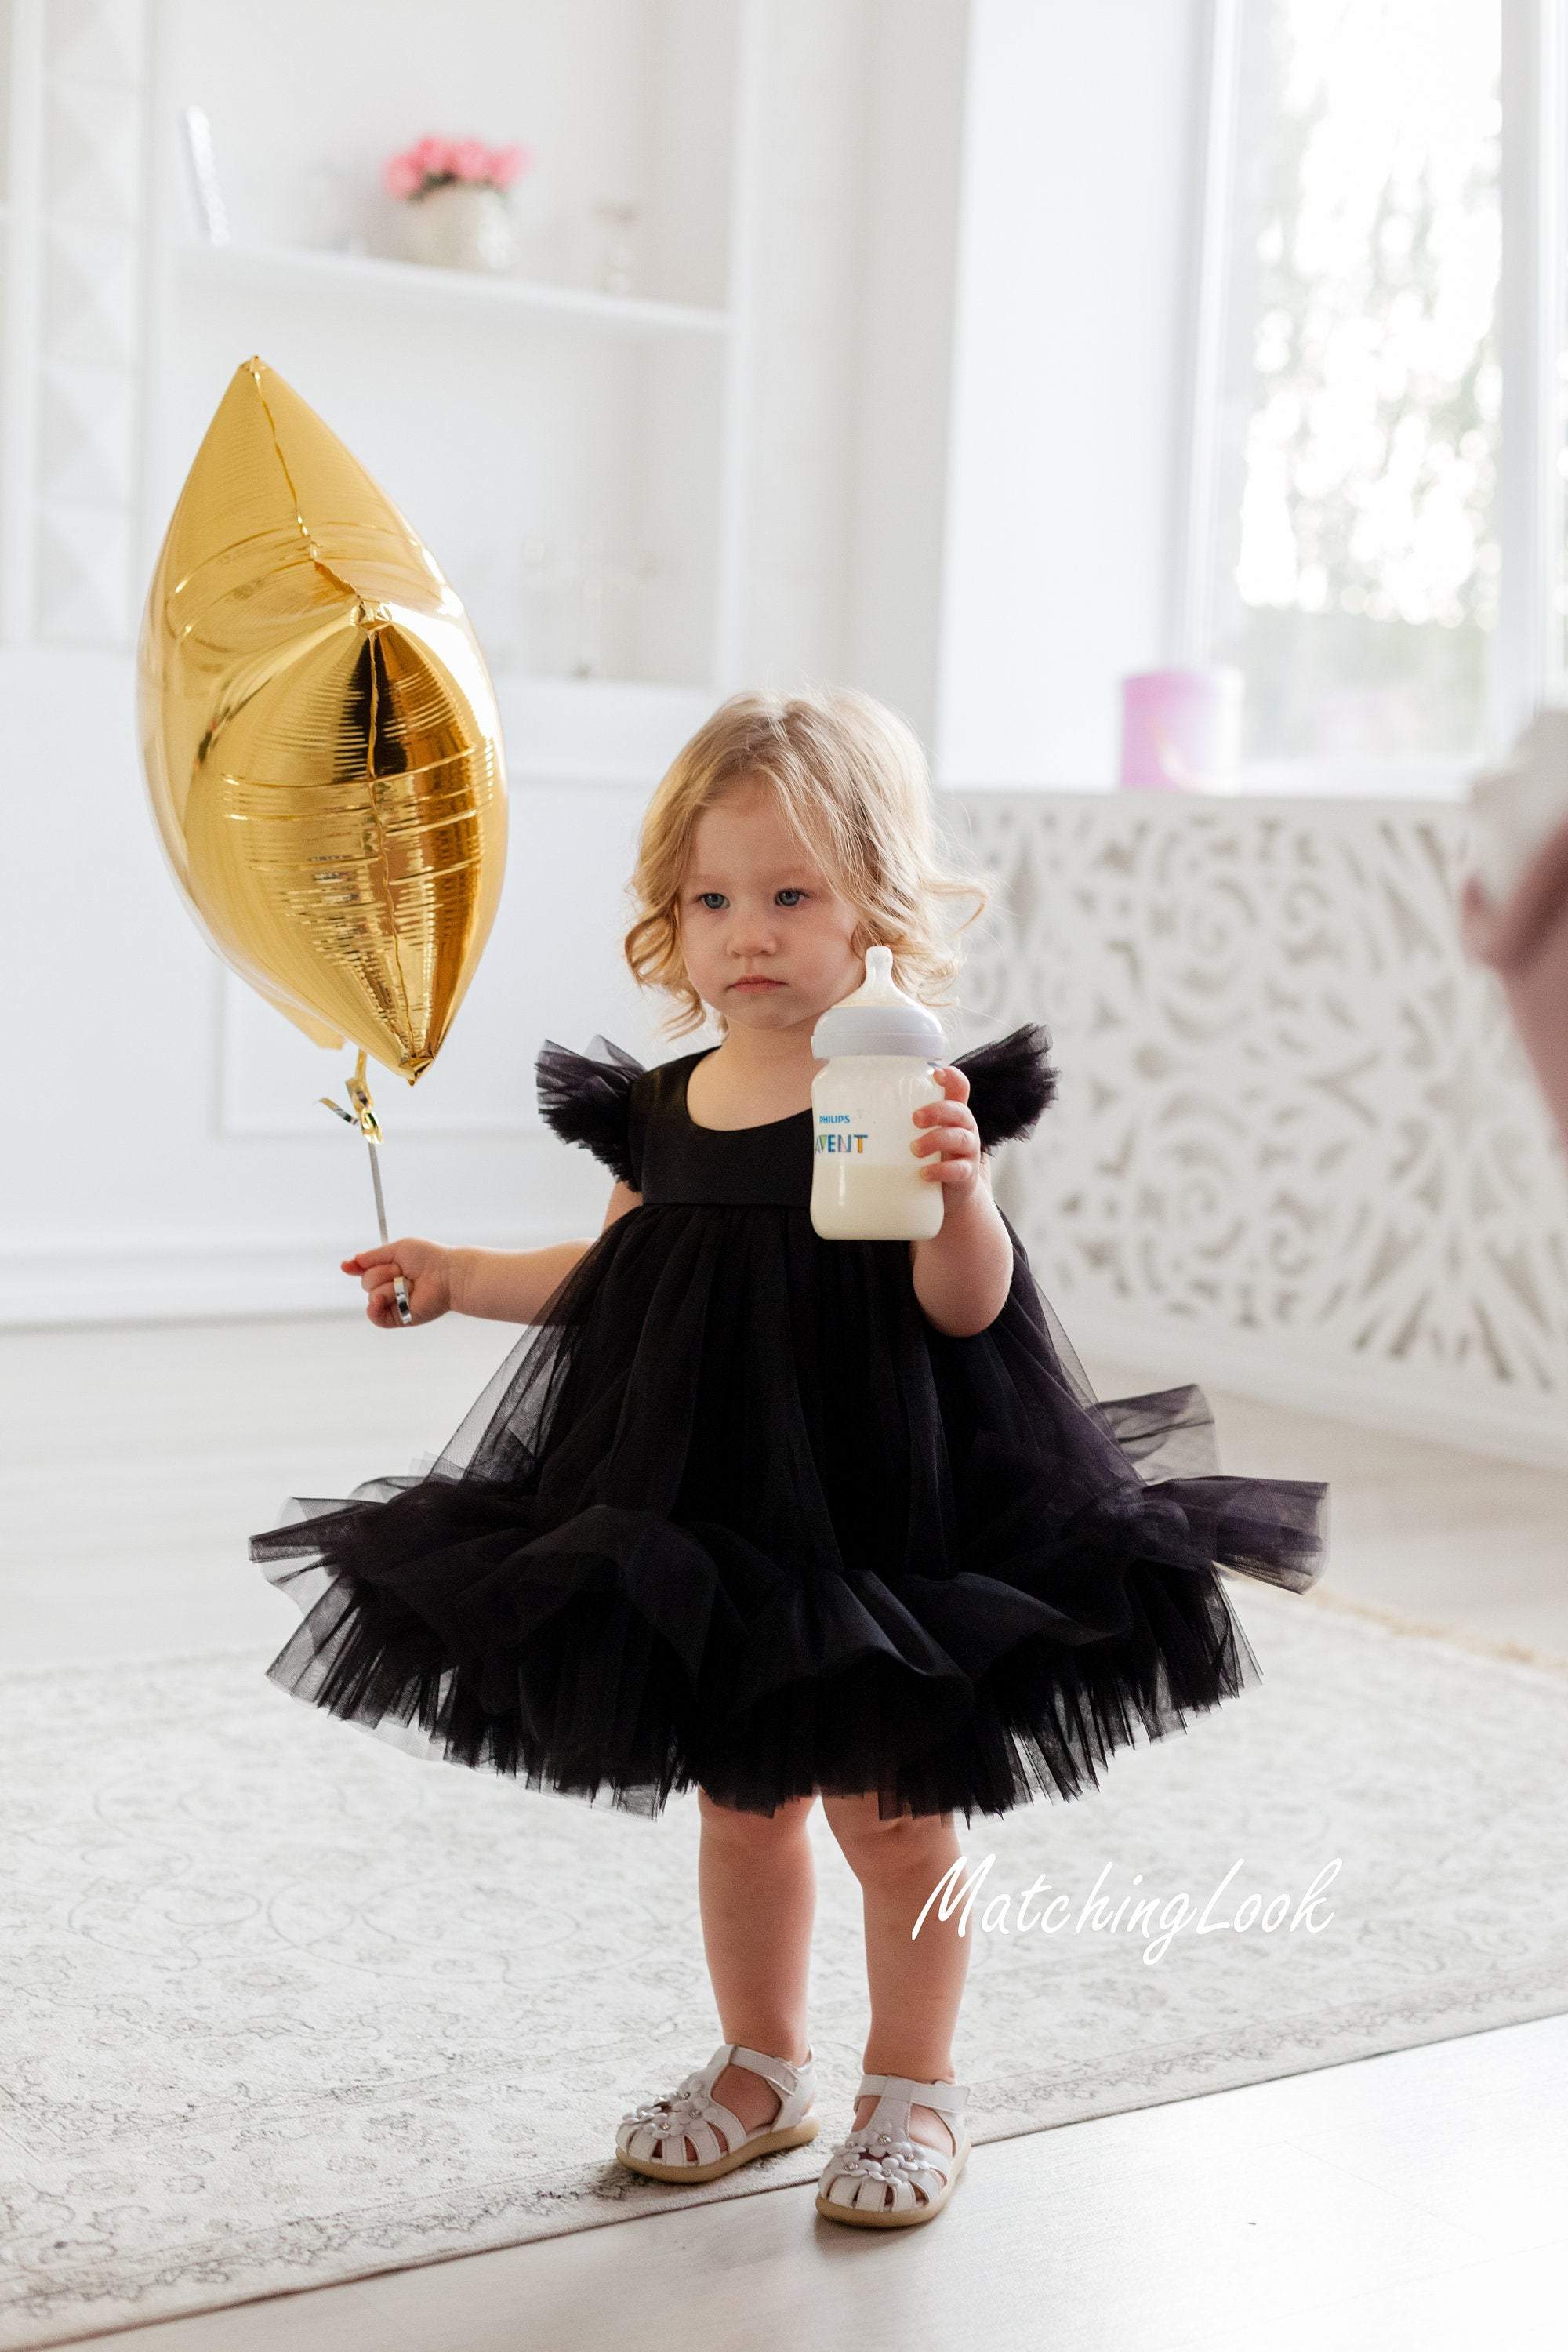 TOWED22 Baby Dresses,Todder Baby Girl Dress Lace Pageant Gown Flower Long  Sleeve Dress for Girls Party Tulle Sundress,Black - Walmart.com